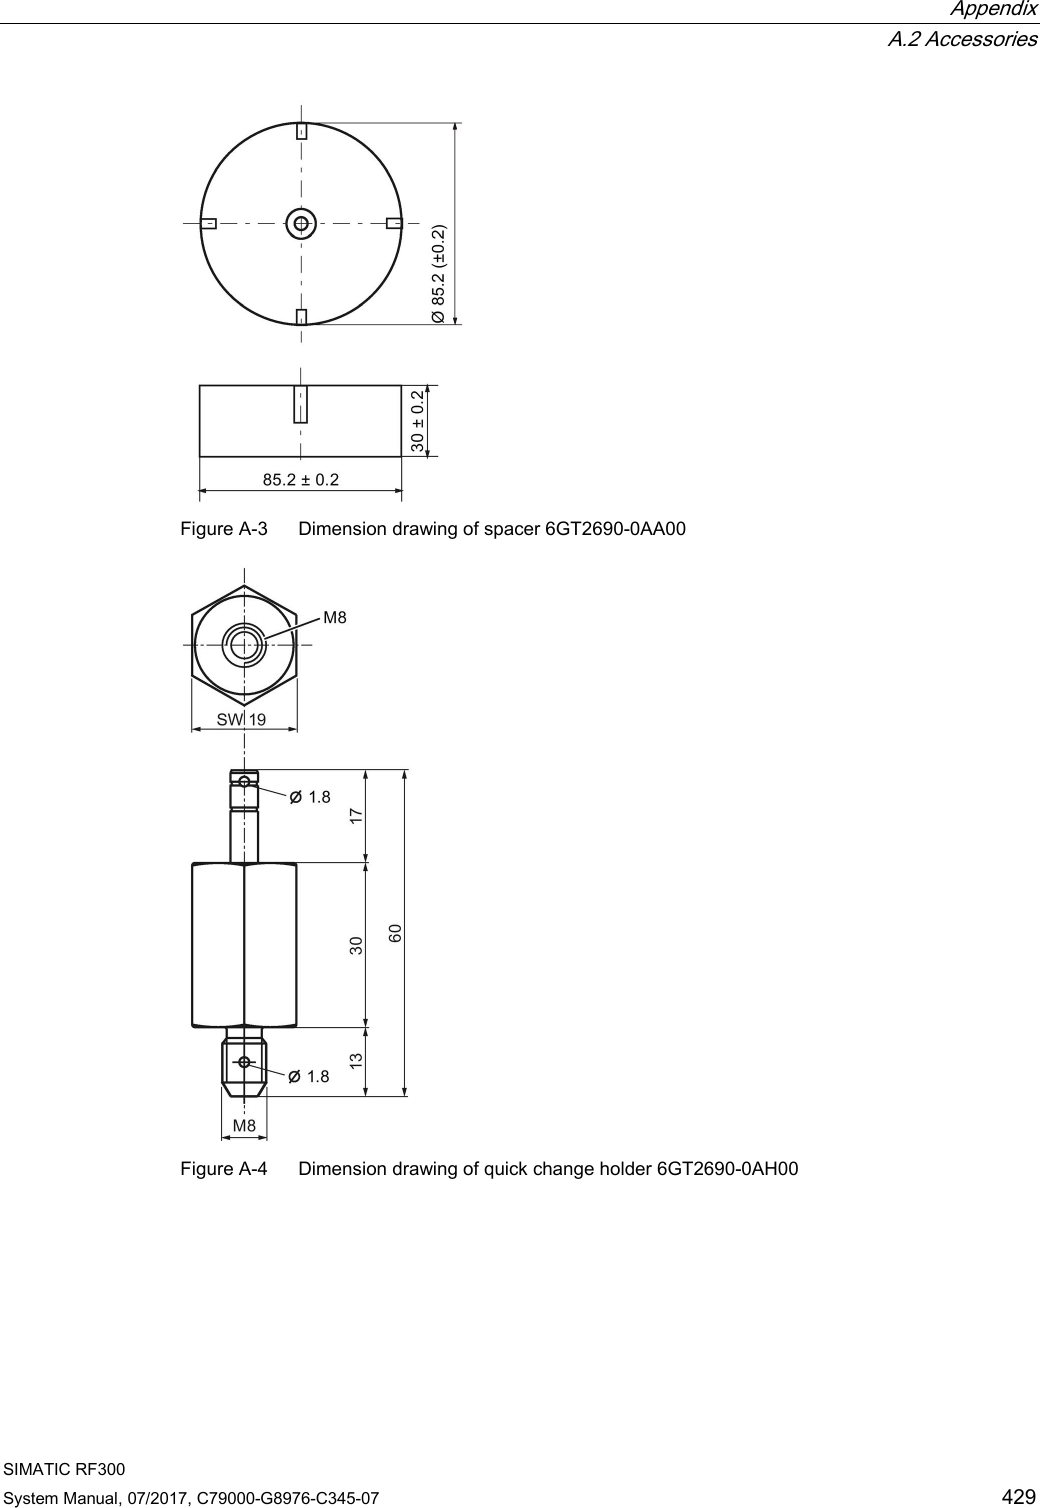  Appendix  A.2 Accessories SIMATIC RF300 System Manual, 07/2017, C79000-G8976-C345-07 429  Figure A-3  Dimension drawing of spacer 6GT2690-0AA00  Figure A-4  Dimension drawing of quick change holder 6GT2690-0AH00 